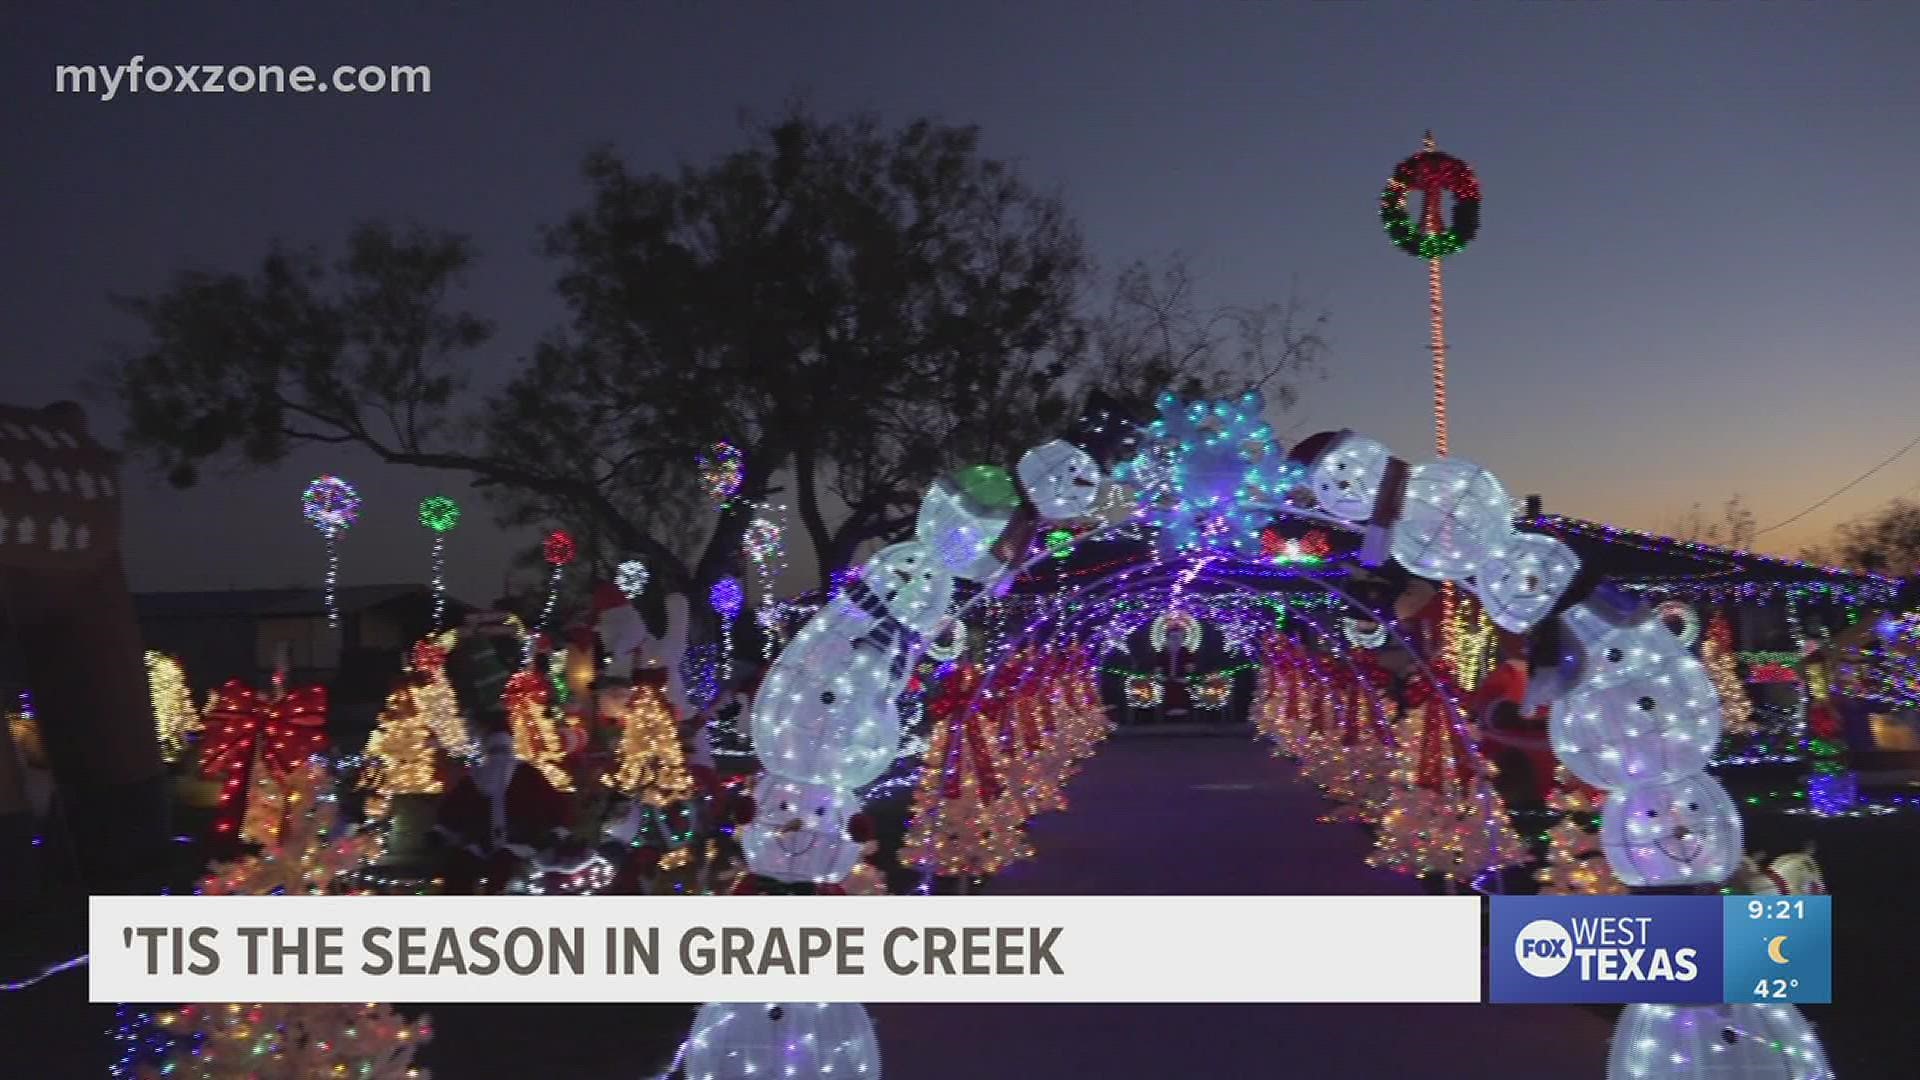 Grape Creek residents continue the tradition of bringing the Christmas joy to the community